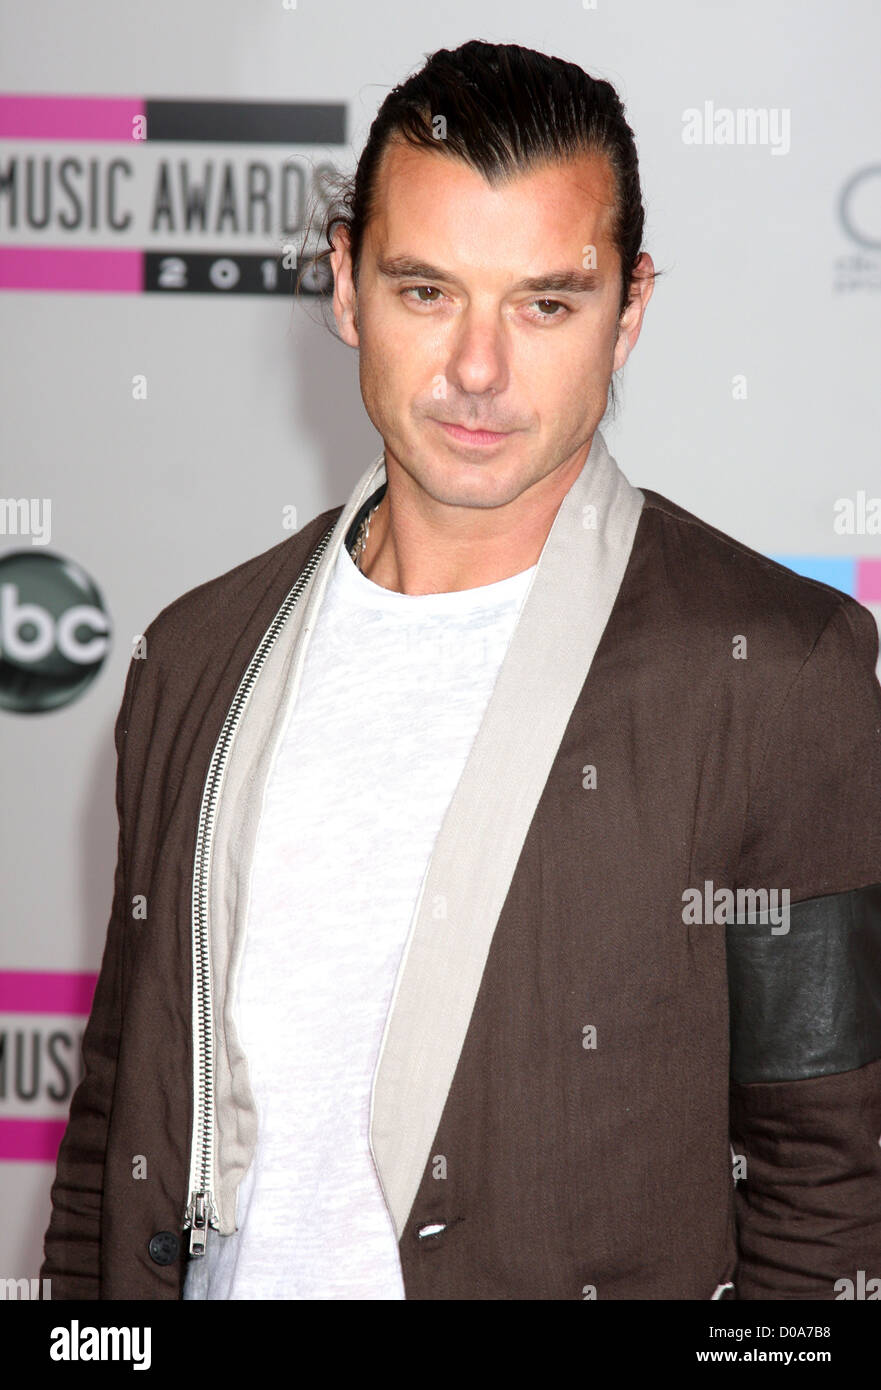 Gavin Rossdale 2010 American Music Awards (AMAs) held at the Nokia Theatre L.A. Live - Arrivals Los Angeles, California - Stock Photo